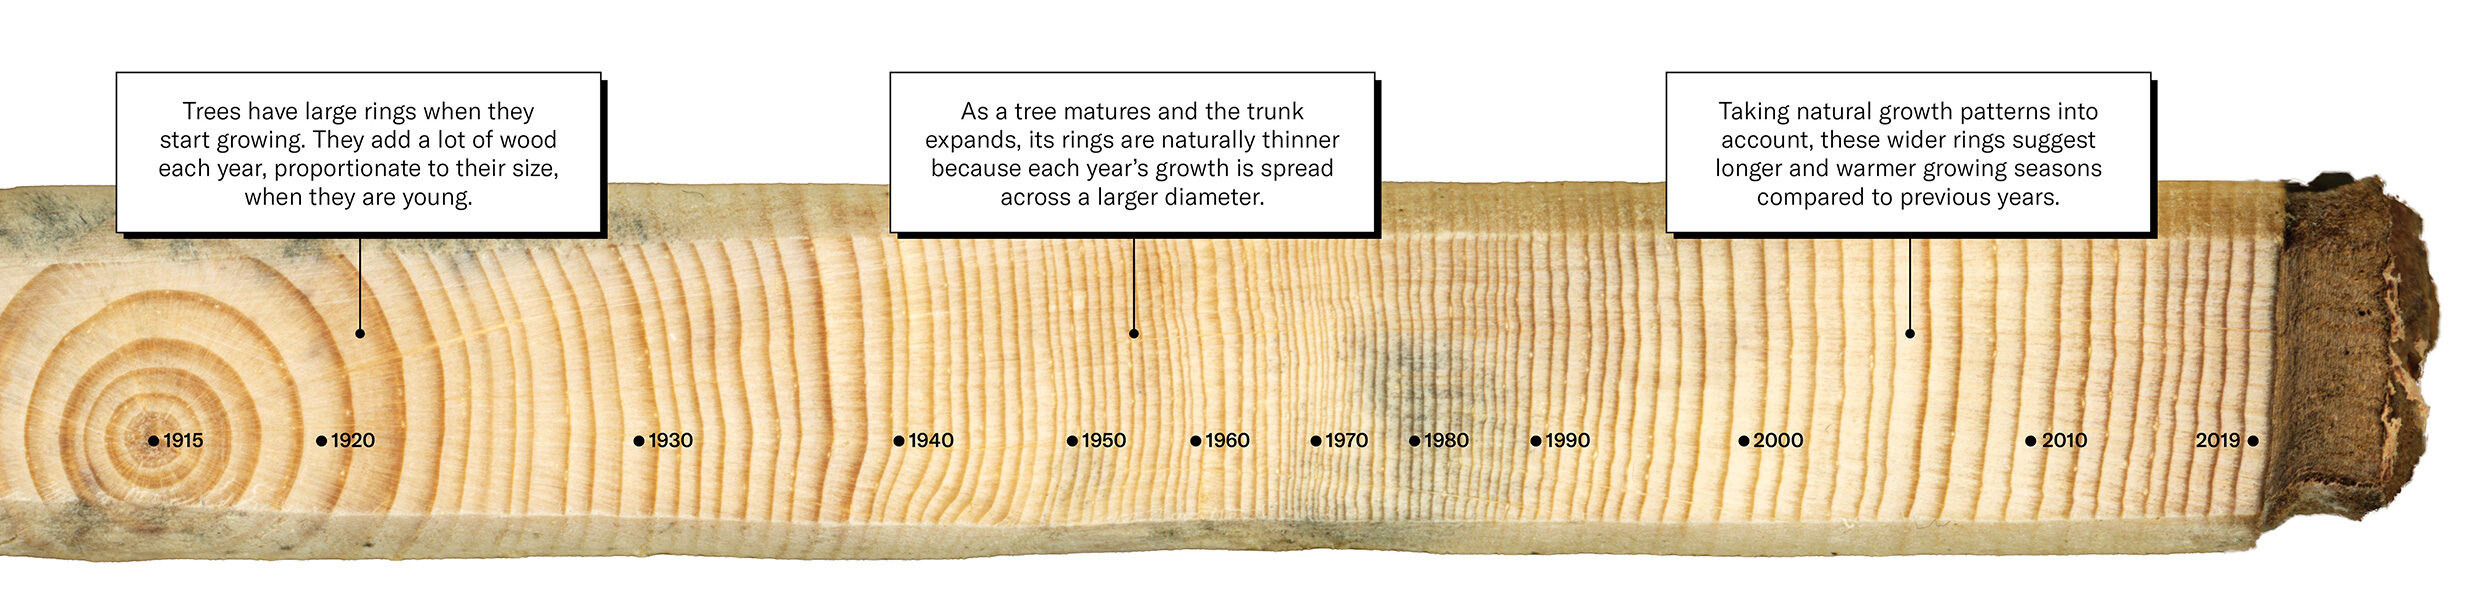 A closeup horizontal view of tree rings from 1915 to 2019 in a tree sample with the following annotations: 1921: Trees have large rings when they start growing. They add a lot of wood each year, proportionate to their size, when they are young. 1955: As a tree matures and the trunk expands, its rings are naturally thinner because each year’s growth is spread across a larger diameter. 2006: Taking natural growth patterns into account, these wider rings suggest longer and warmer growing seasons compared to previous years.